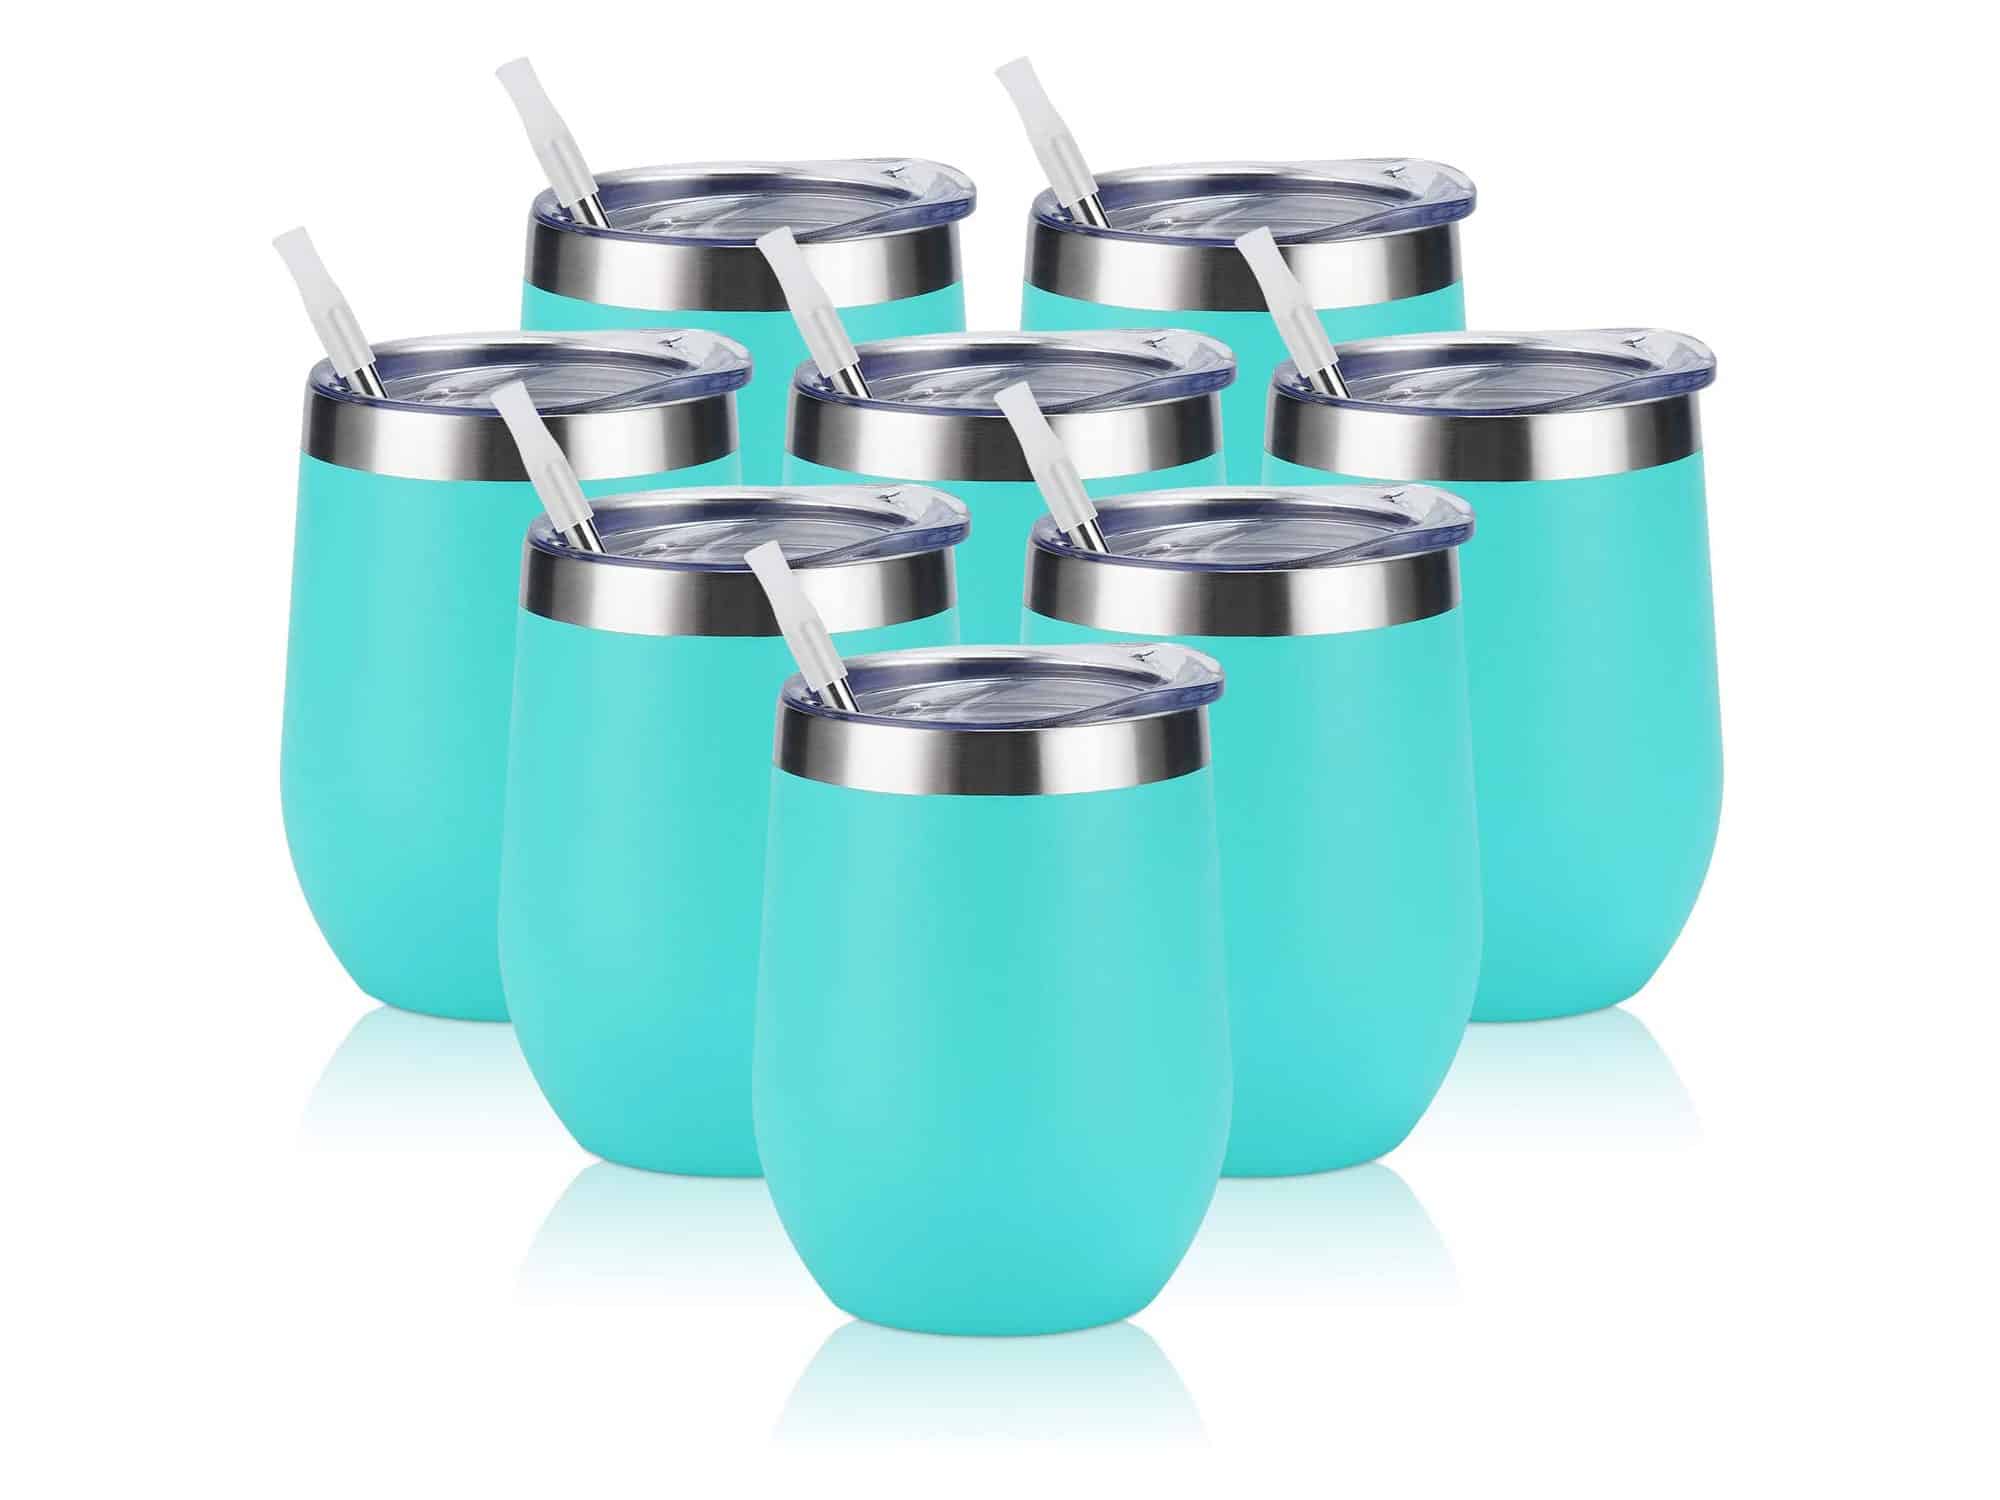 8 Pack 12Oz Stainless Steel Wine Tumblers, Insulated Wine Tumbler, Double Wall Insulated Wine Glass, Stainless Steel Stemless Wine Cups with Lids for Coffee, Wine, Cocktails, Champaign, Aqua Blue